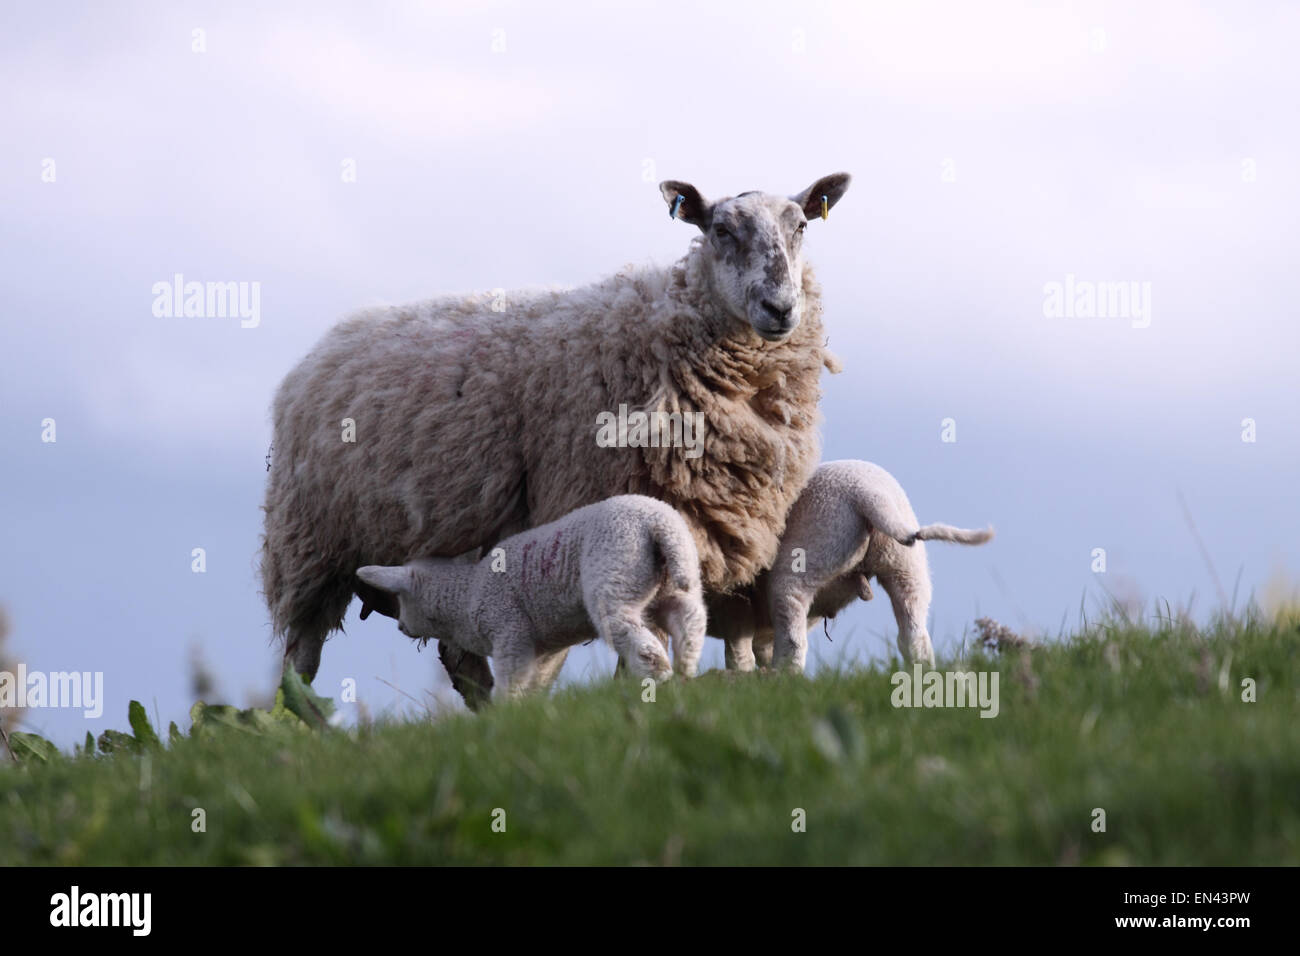 Herefordshire UK April 2015 Family of sheep gather under looming grey clouds as the final rays of sunlight after a much cooler spring day. Stock Photo